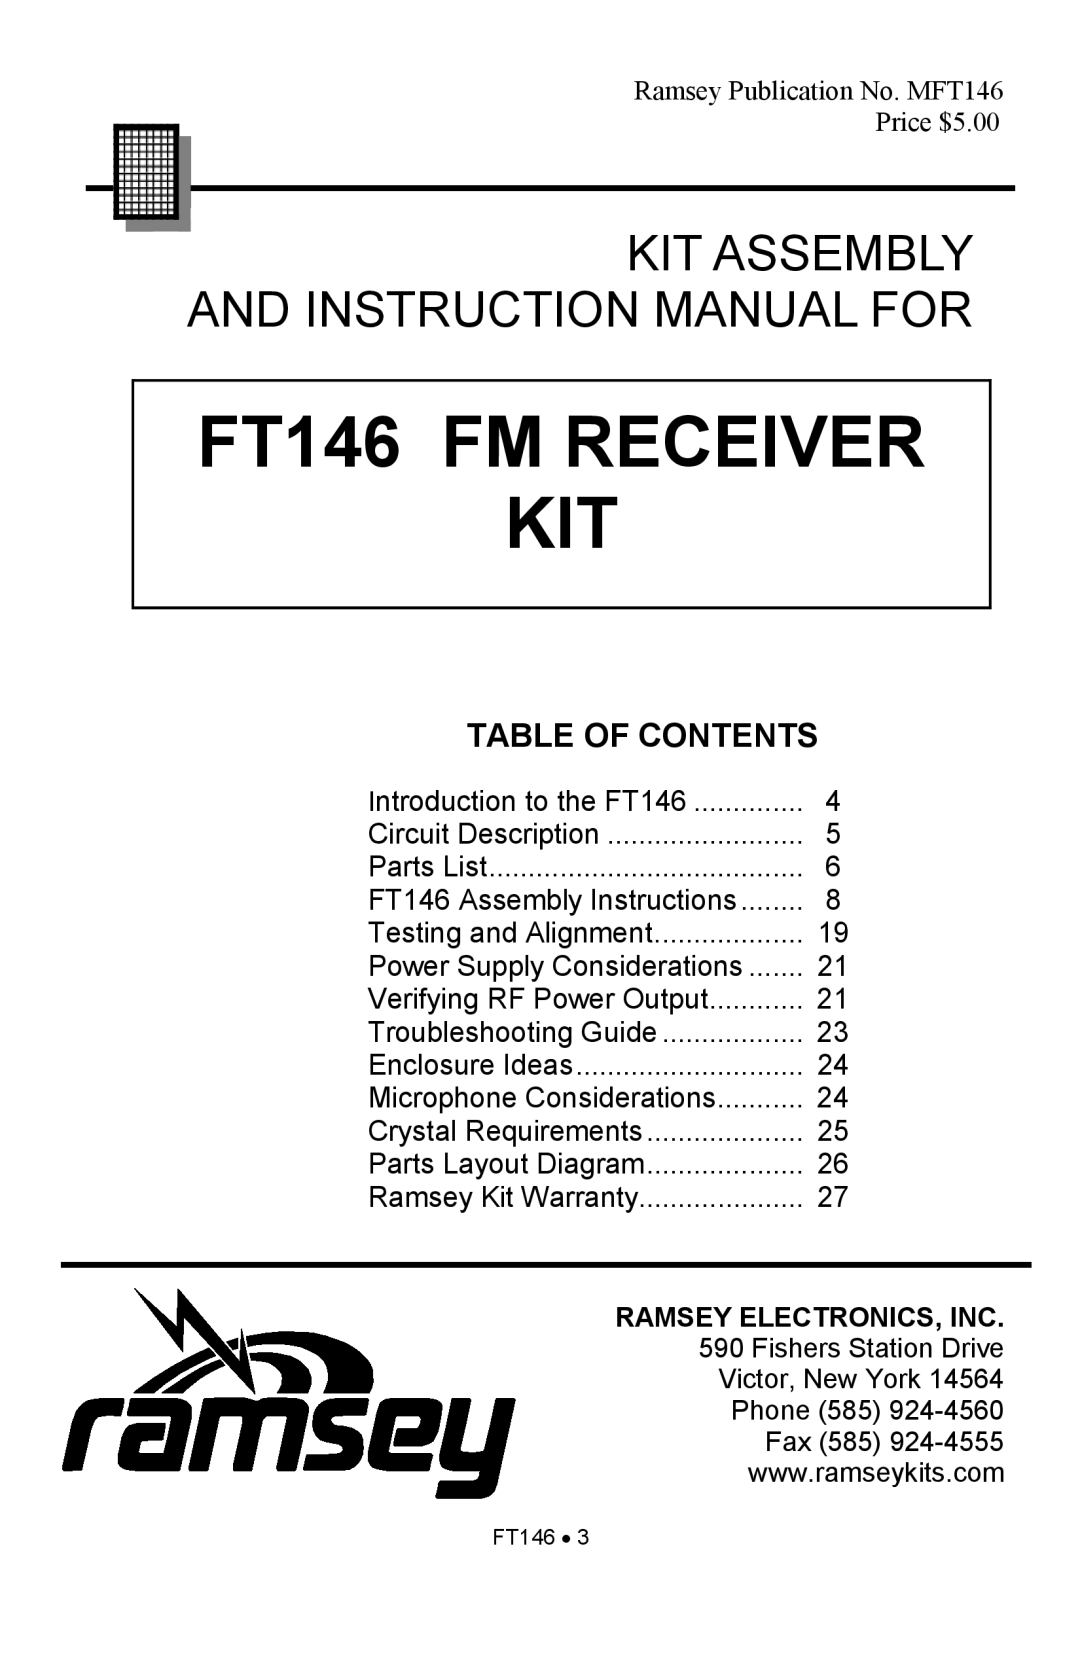 Ramsey Electronics manual FT146 FM RECEIVER KIT, Table Of Contents, Kit Assembly 